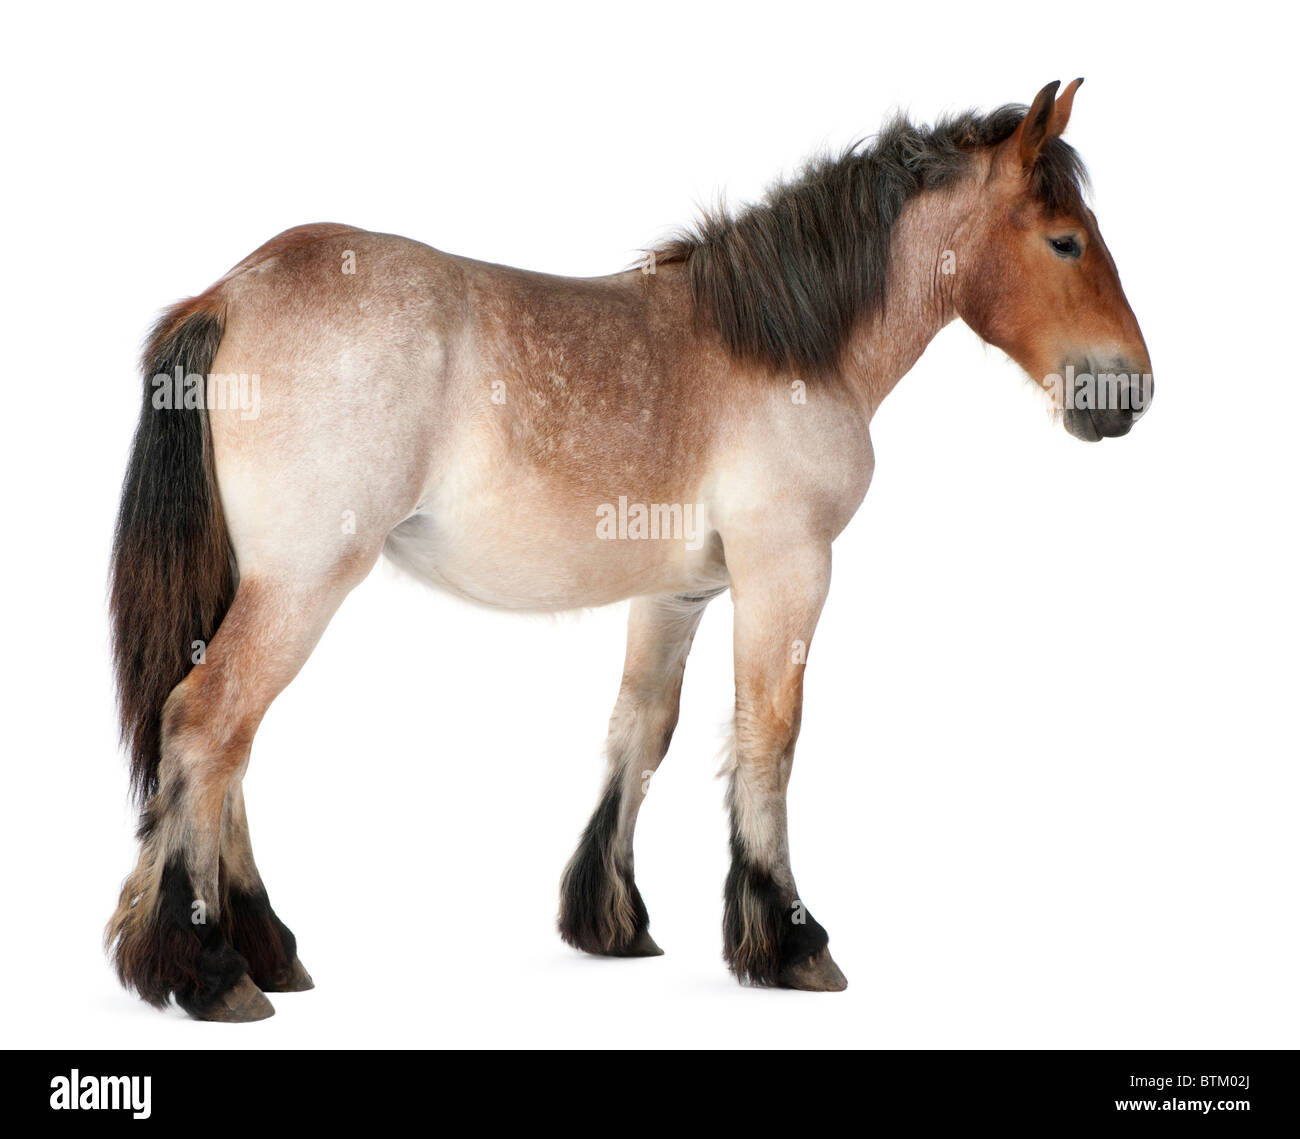 Belgian Heavy Horse foal, Brabancon, a draft horse breed, 13 months old, standing in front of white background Stock Photo